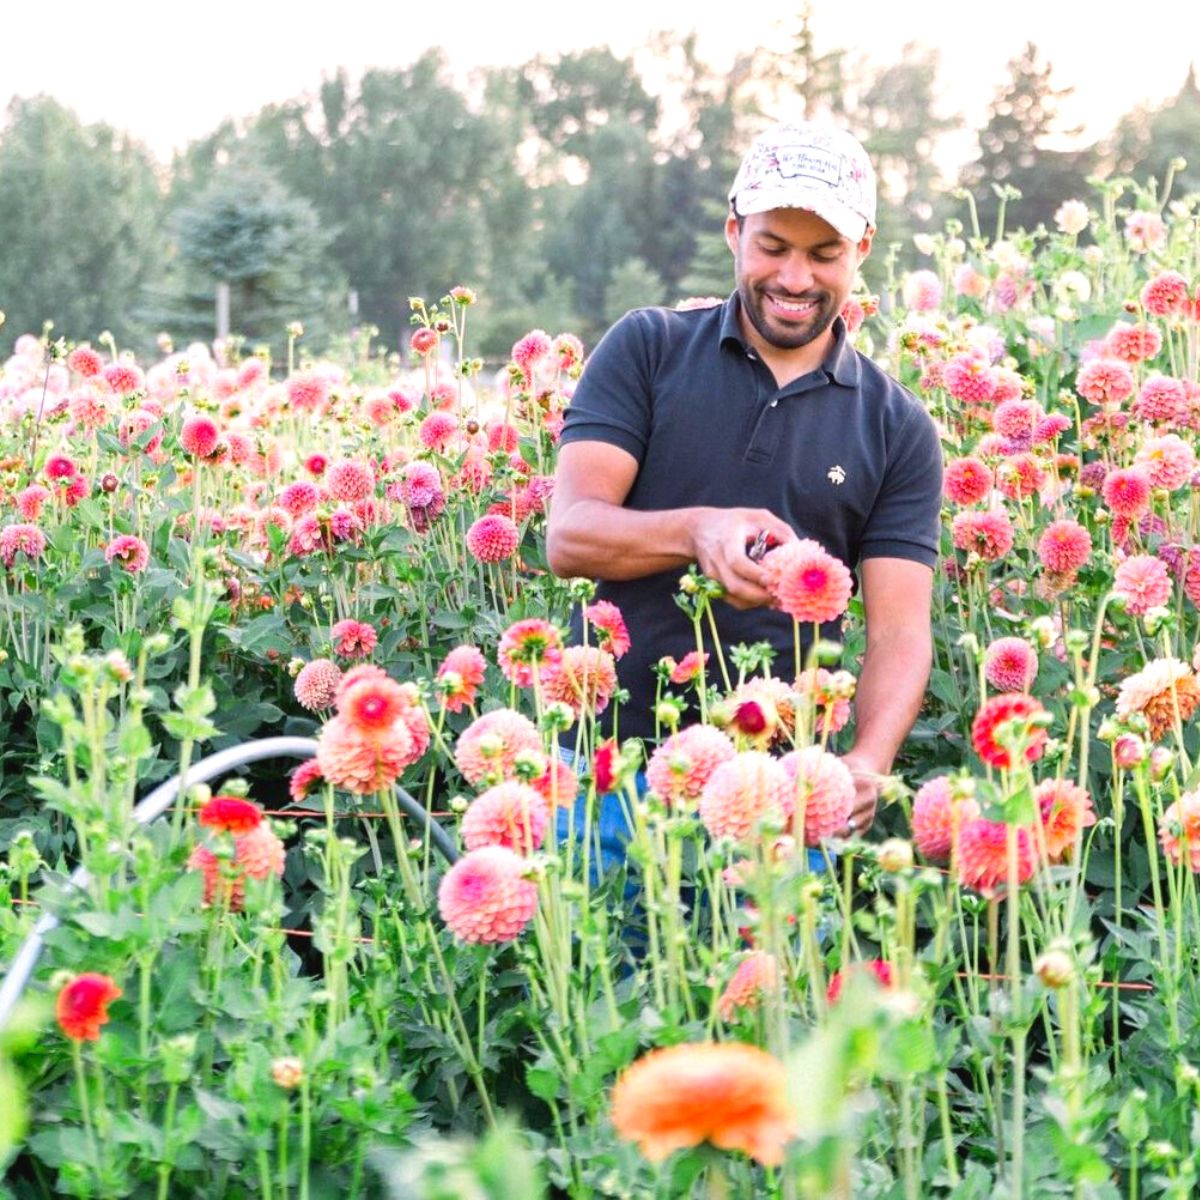 The Flower Hat in his own dahlia field